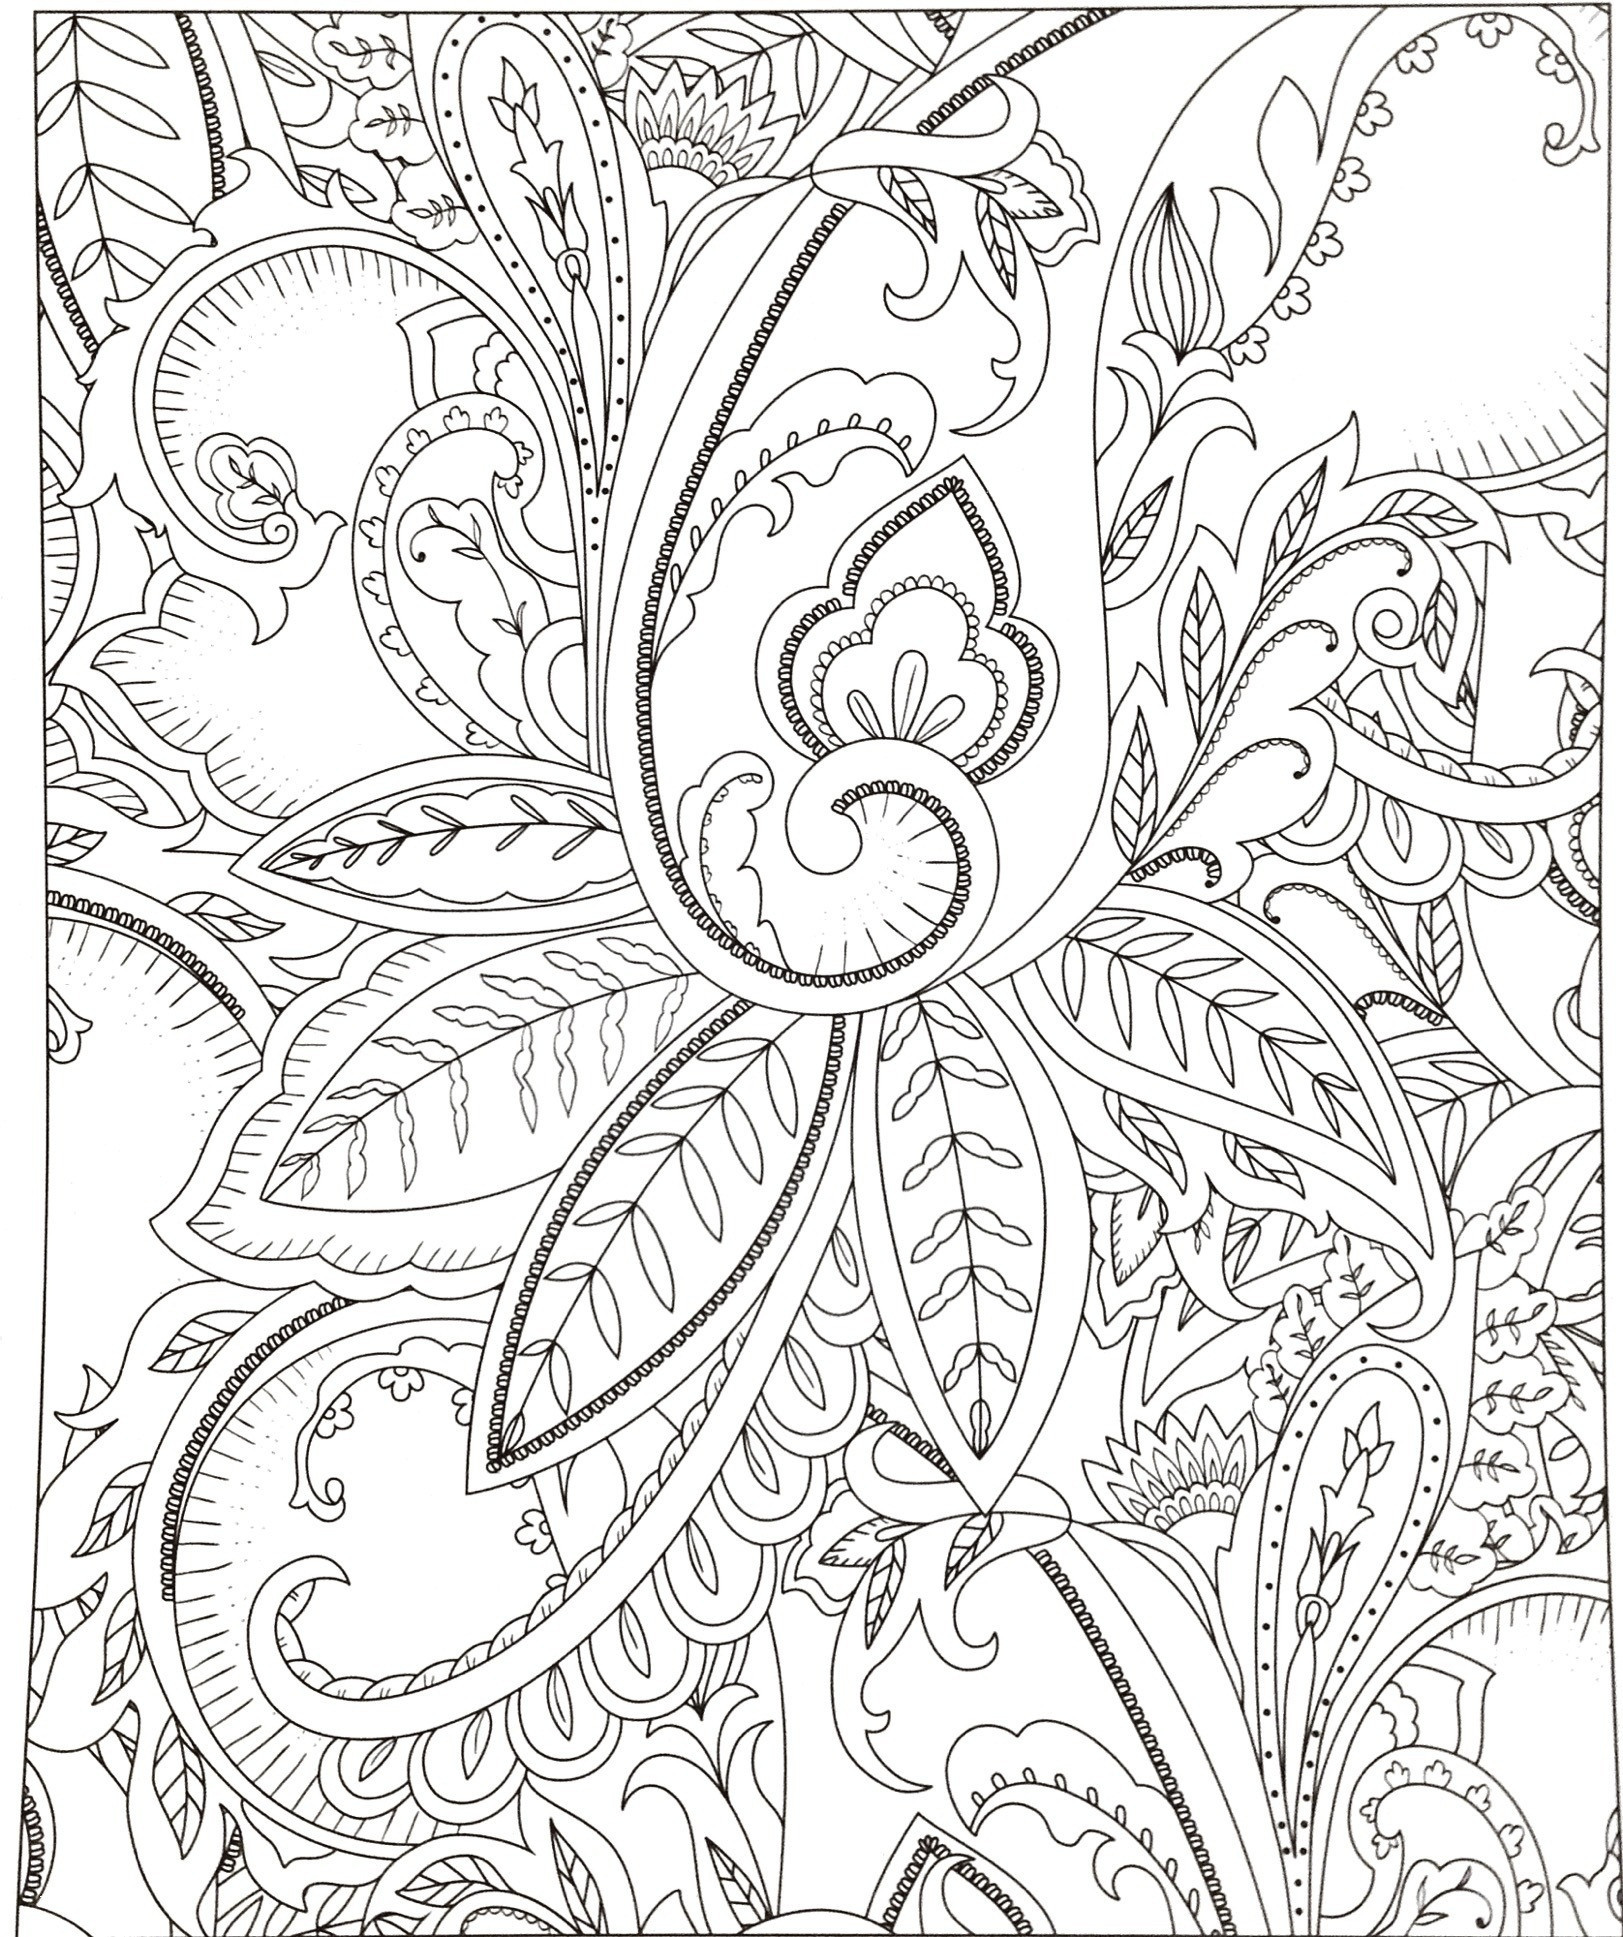 21 Lovable Peacock Feathers In Vase 2024 free download peacock feathers in vase of 20 new adult coloring pages peacock villadellita com with feather coloring pages adult coloring pages peacock beautiful ideas archives mikalhameed